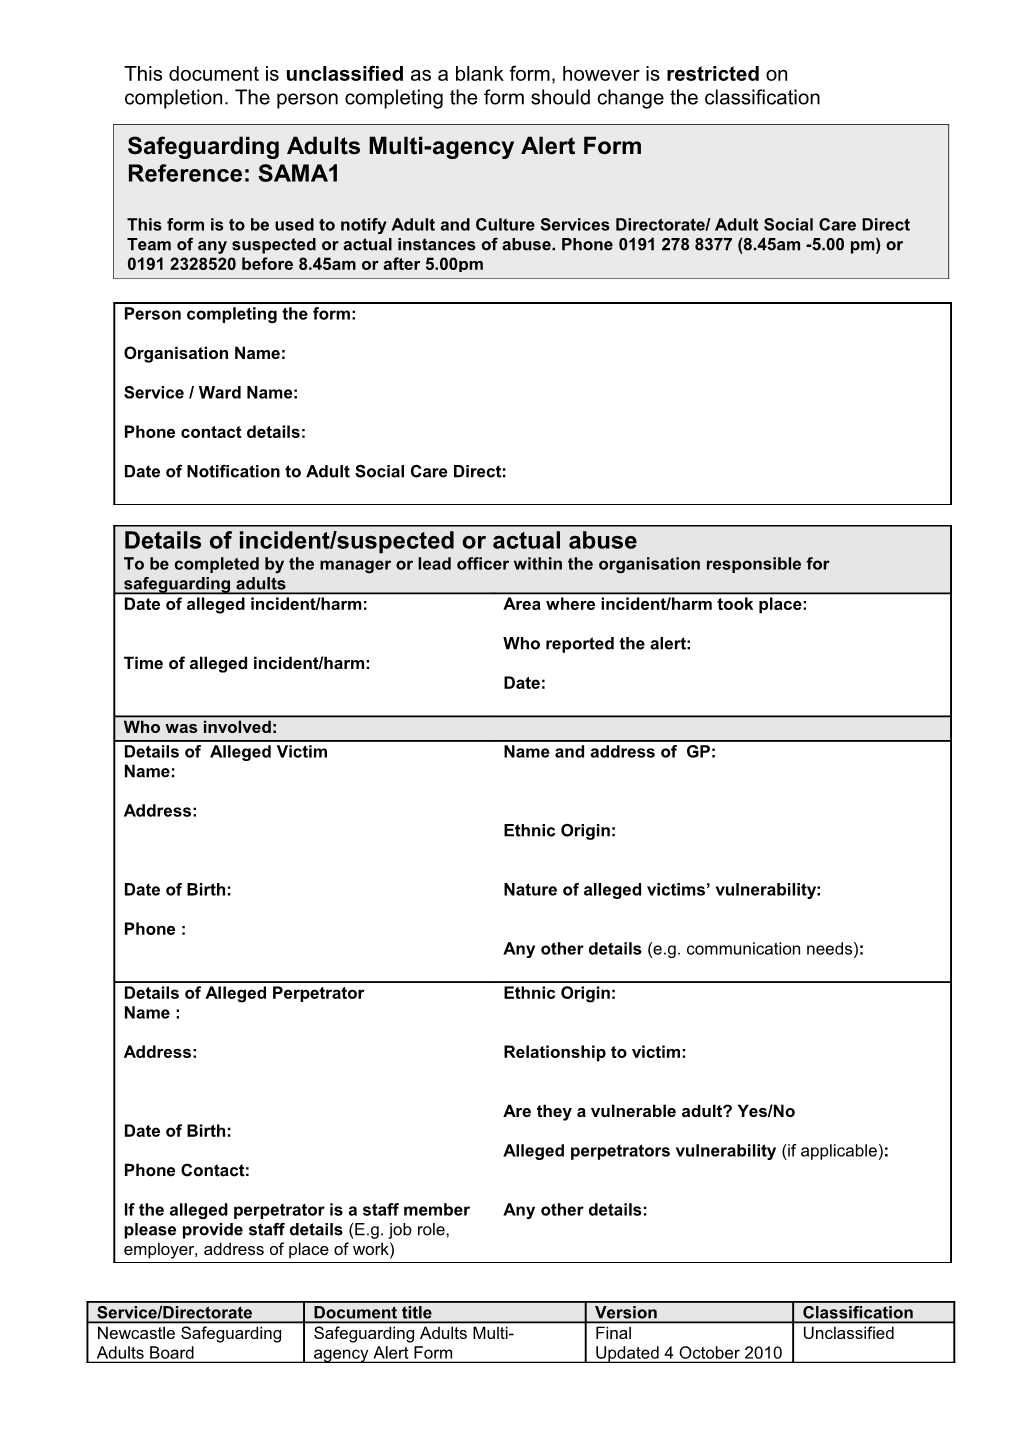 This Document Is Unclassified As a Blank Form, However Is Restricted on Completion. The